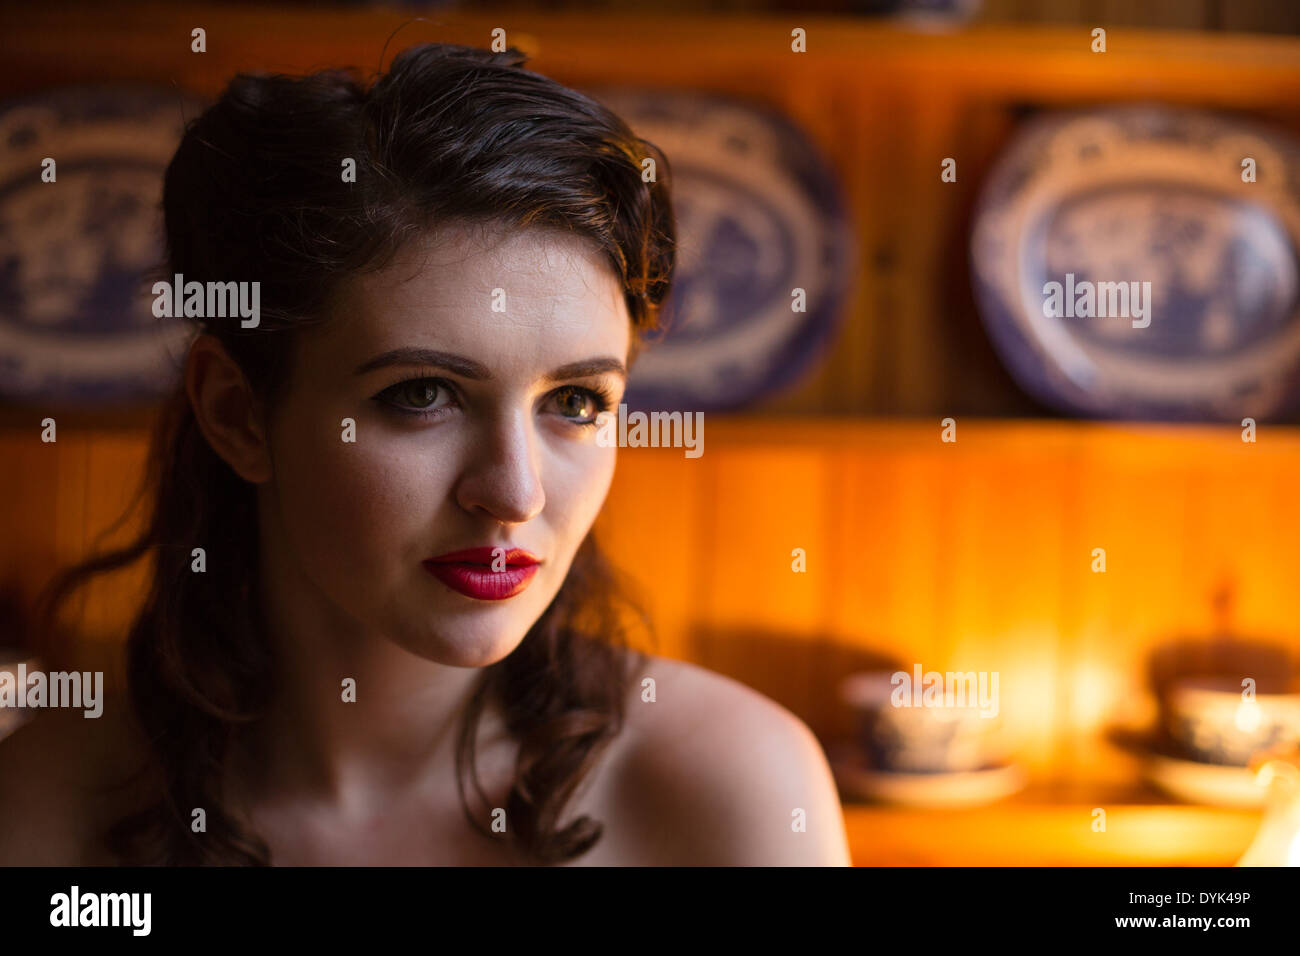 Young woman in an orange, strapless evening dress in front of an old dresser. Stock Photo